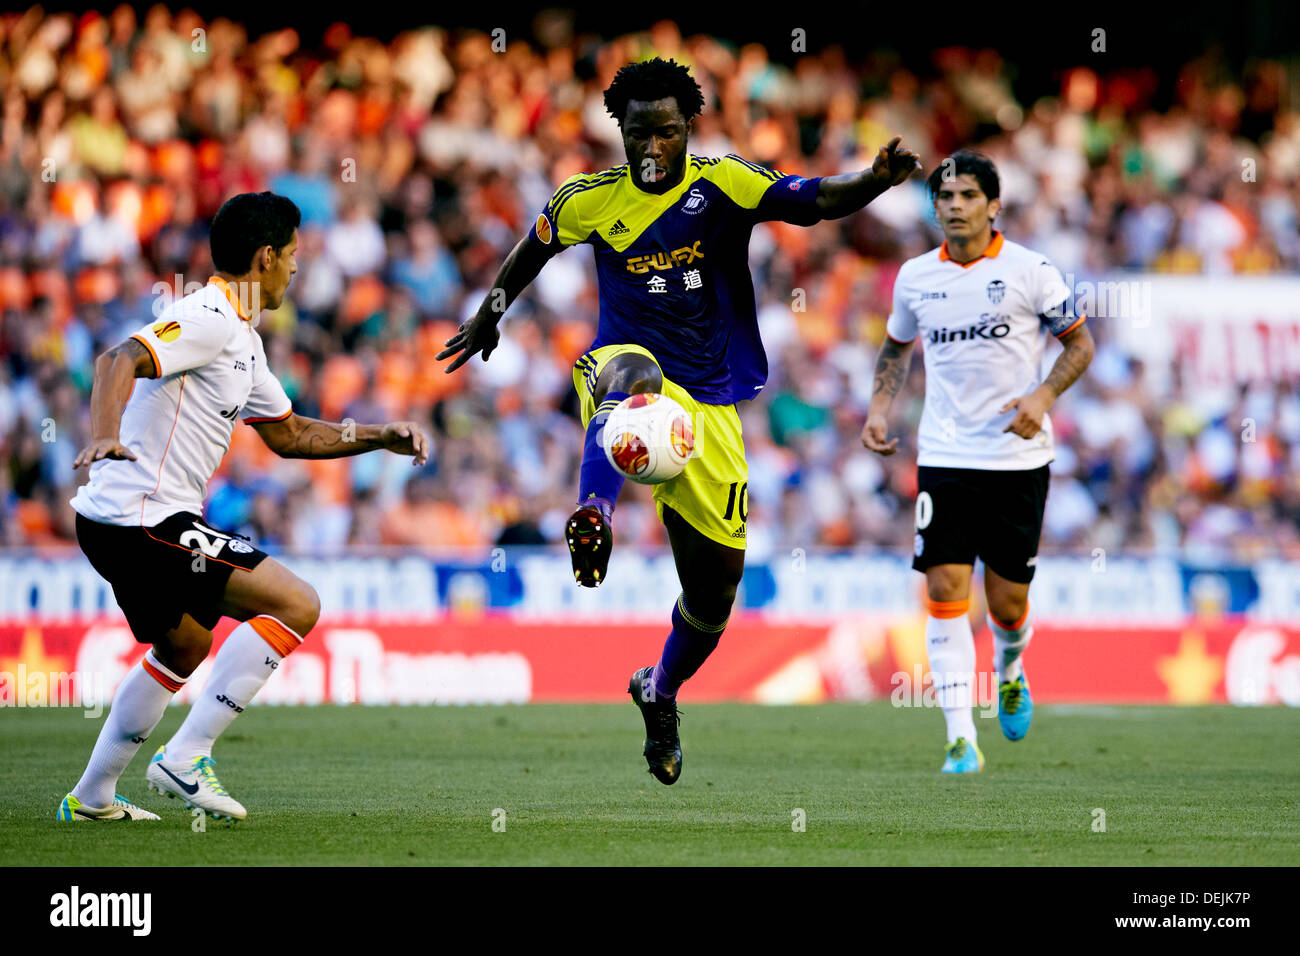 19.09.2013 Valencia, Spain. Forward Wilfried Bony of Swansea City (R) controls the ball in the presence of Defender Ricardo Costa of Valencia CF  during the Europa League game between Valencia and Swansea City from the Mestalla Stadium. Stock Photo